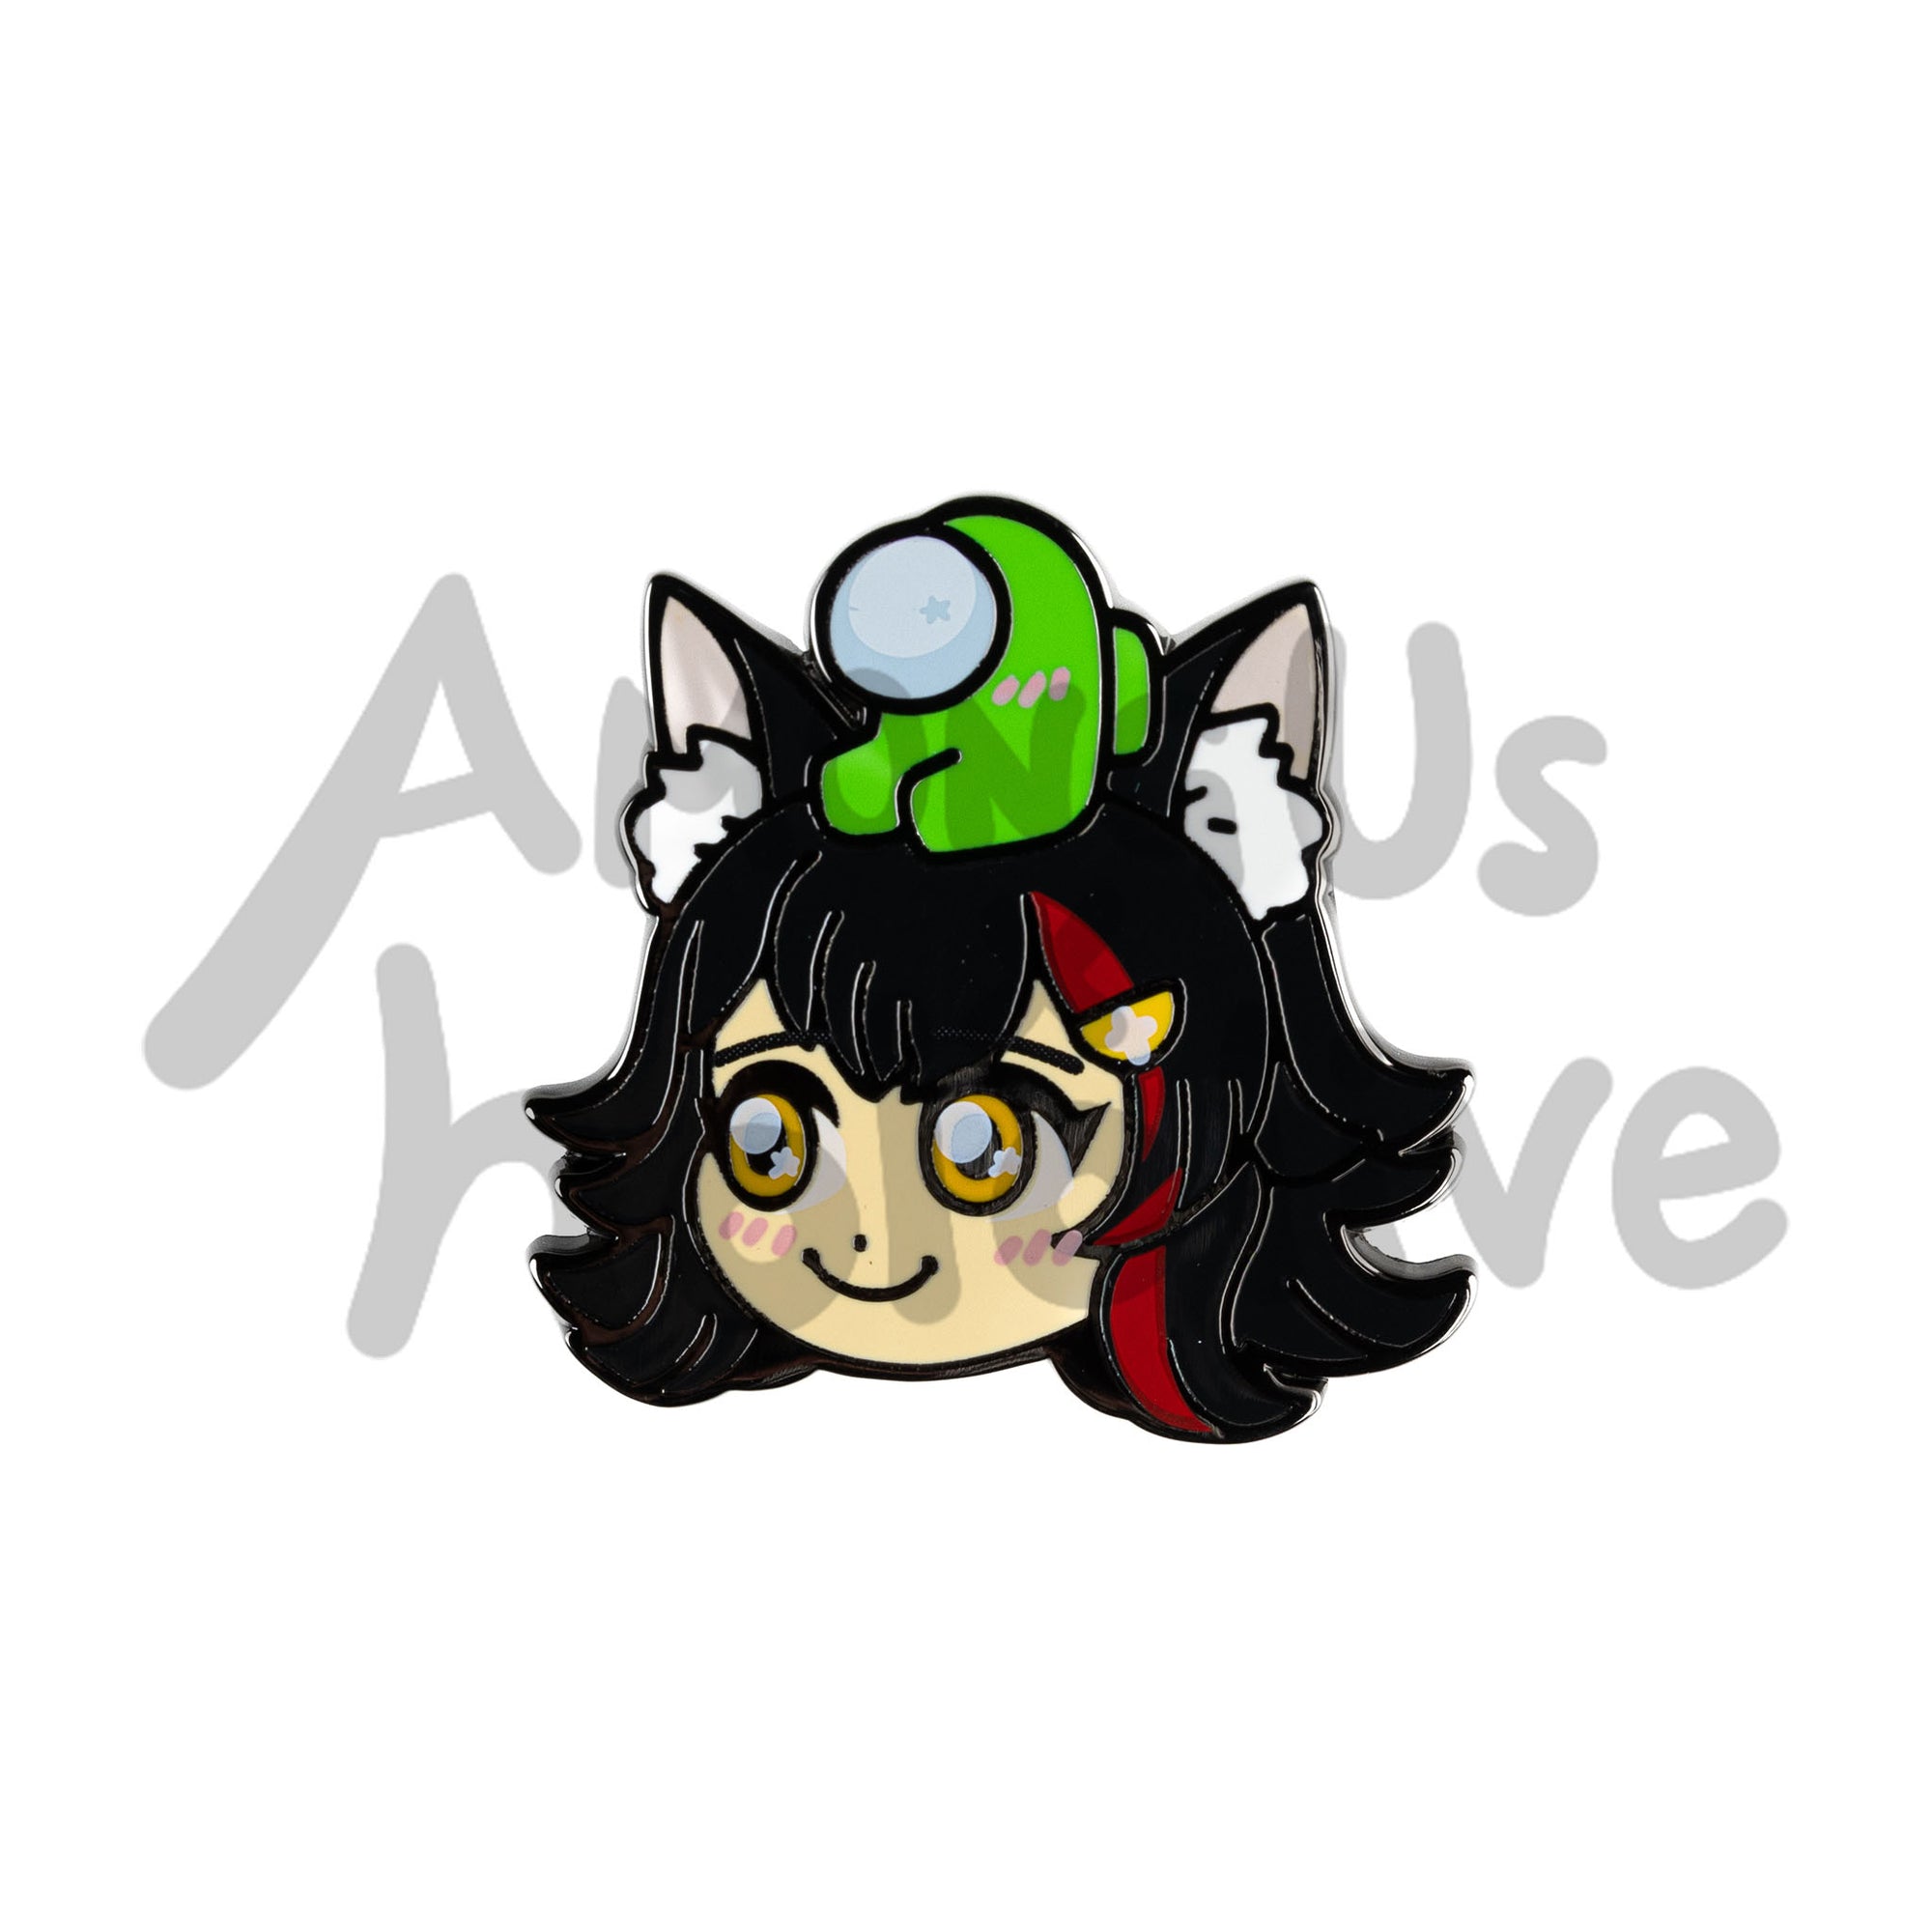 Enamel Pin of Ookami Mio's Face from Hololive. Mio has fair skin, marigold sparkly eyes, and black bobbed hair with matching black cat ears with white tufts. She has a red streak in her hair. There's a Lime Crewmate sitting atop her head. Both characters have pink blush marks on their faces.